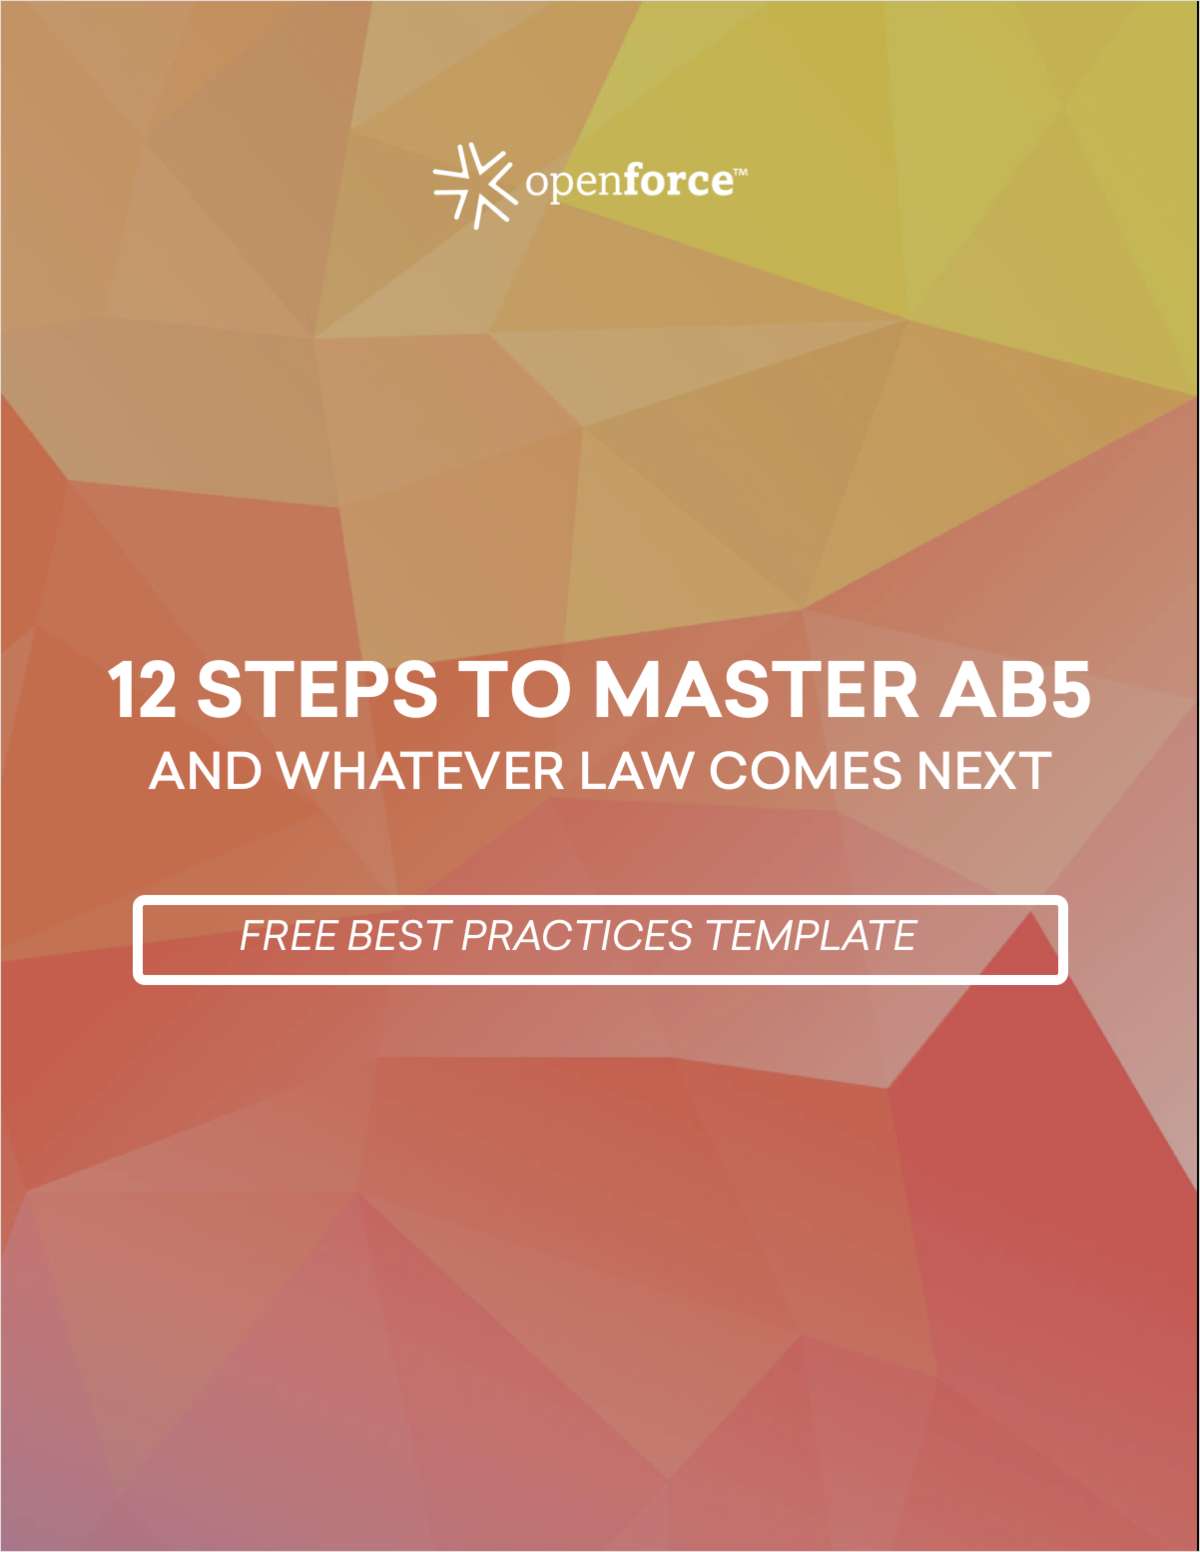 12 Steps to Master AB5 and Whichever Law Comes Next